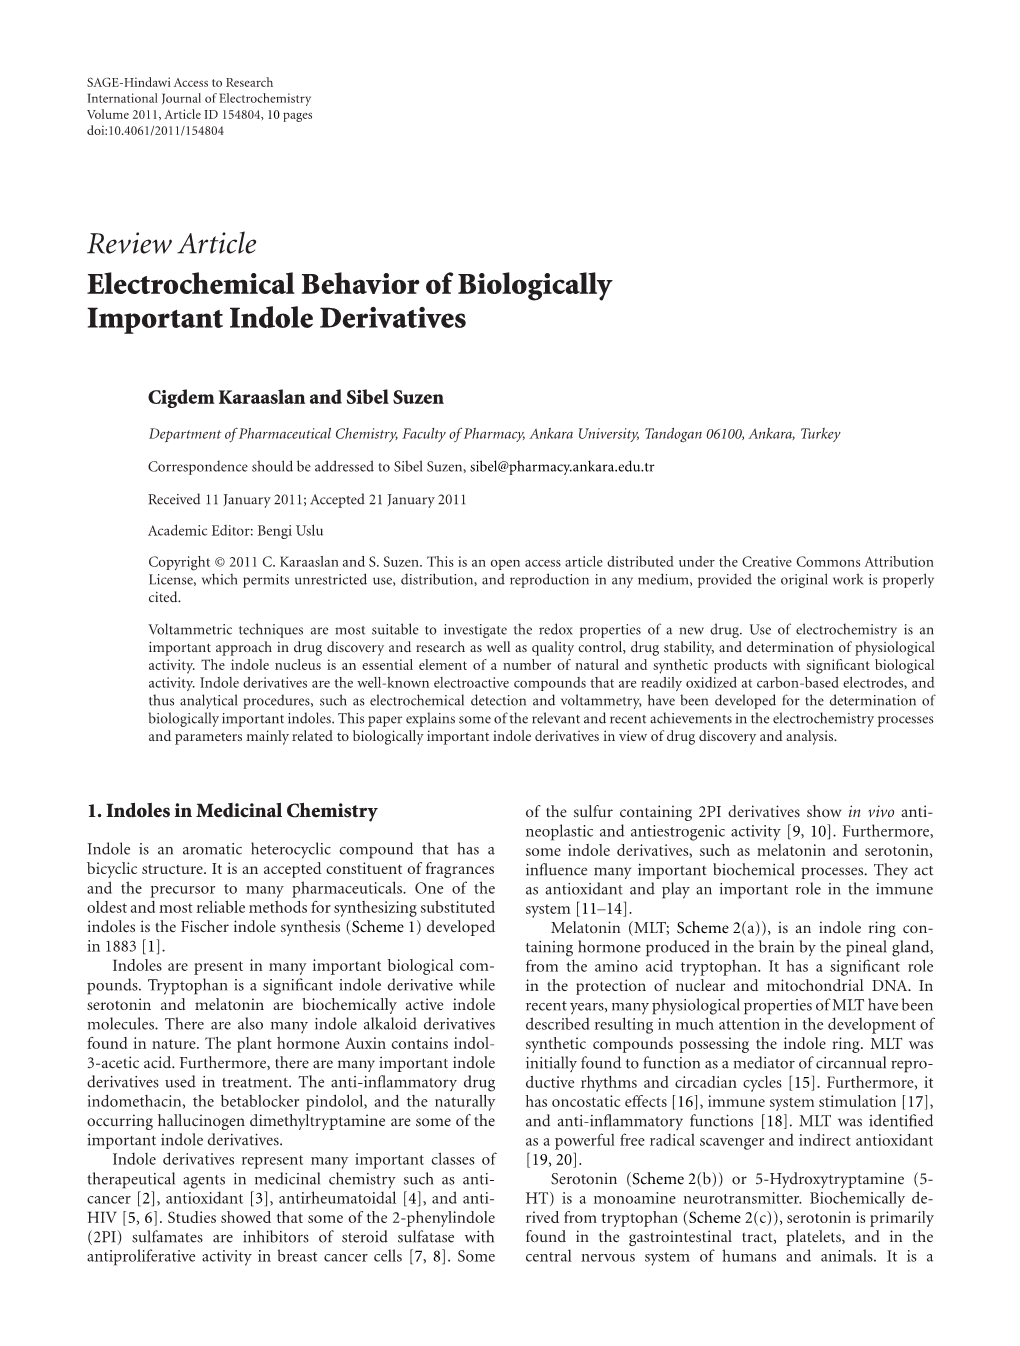 Electrochemical Behavior of Biologically Important Indole Derivatives